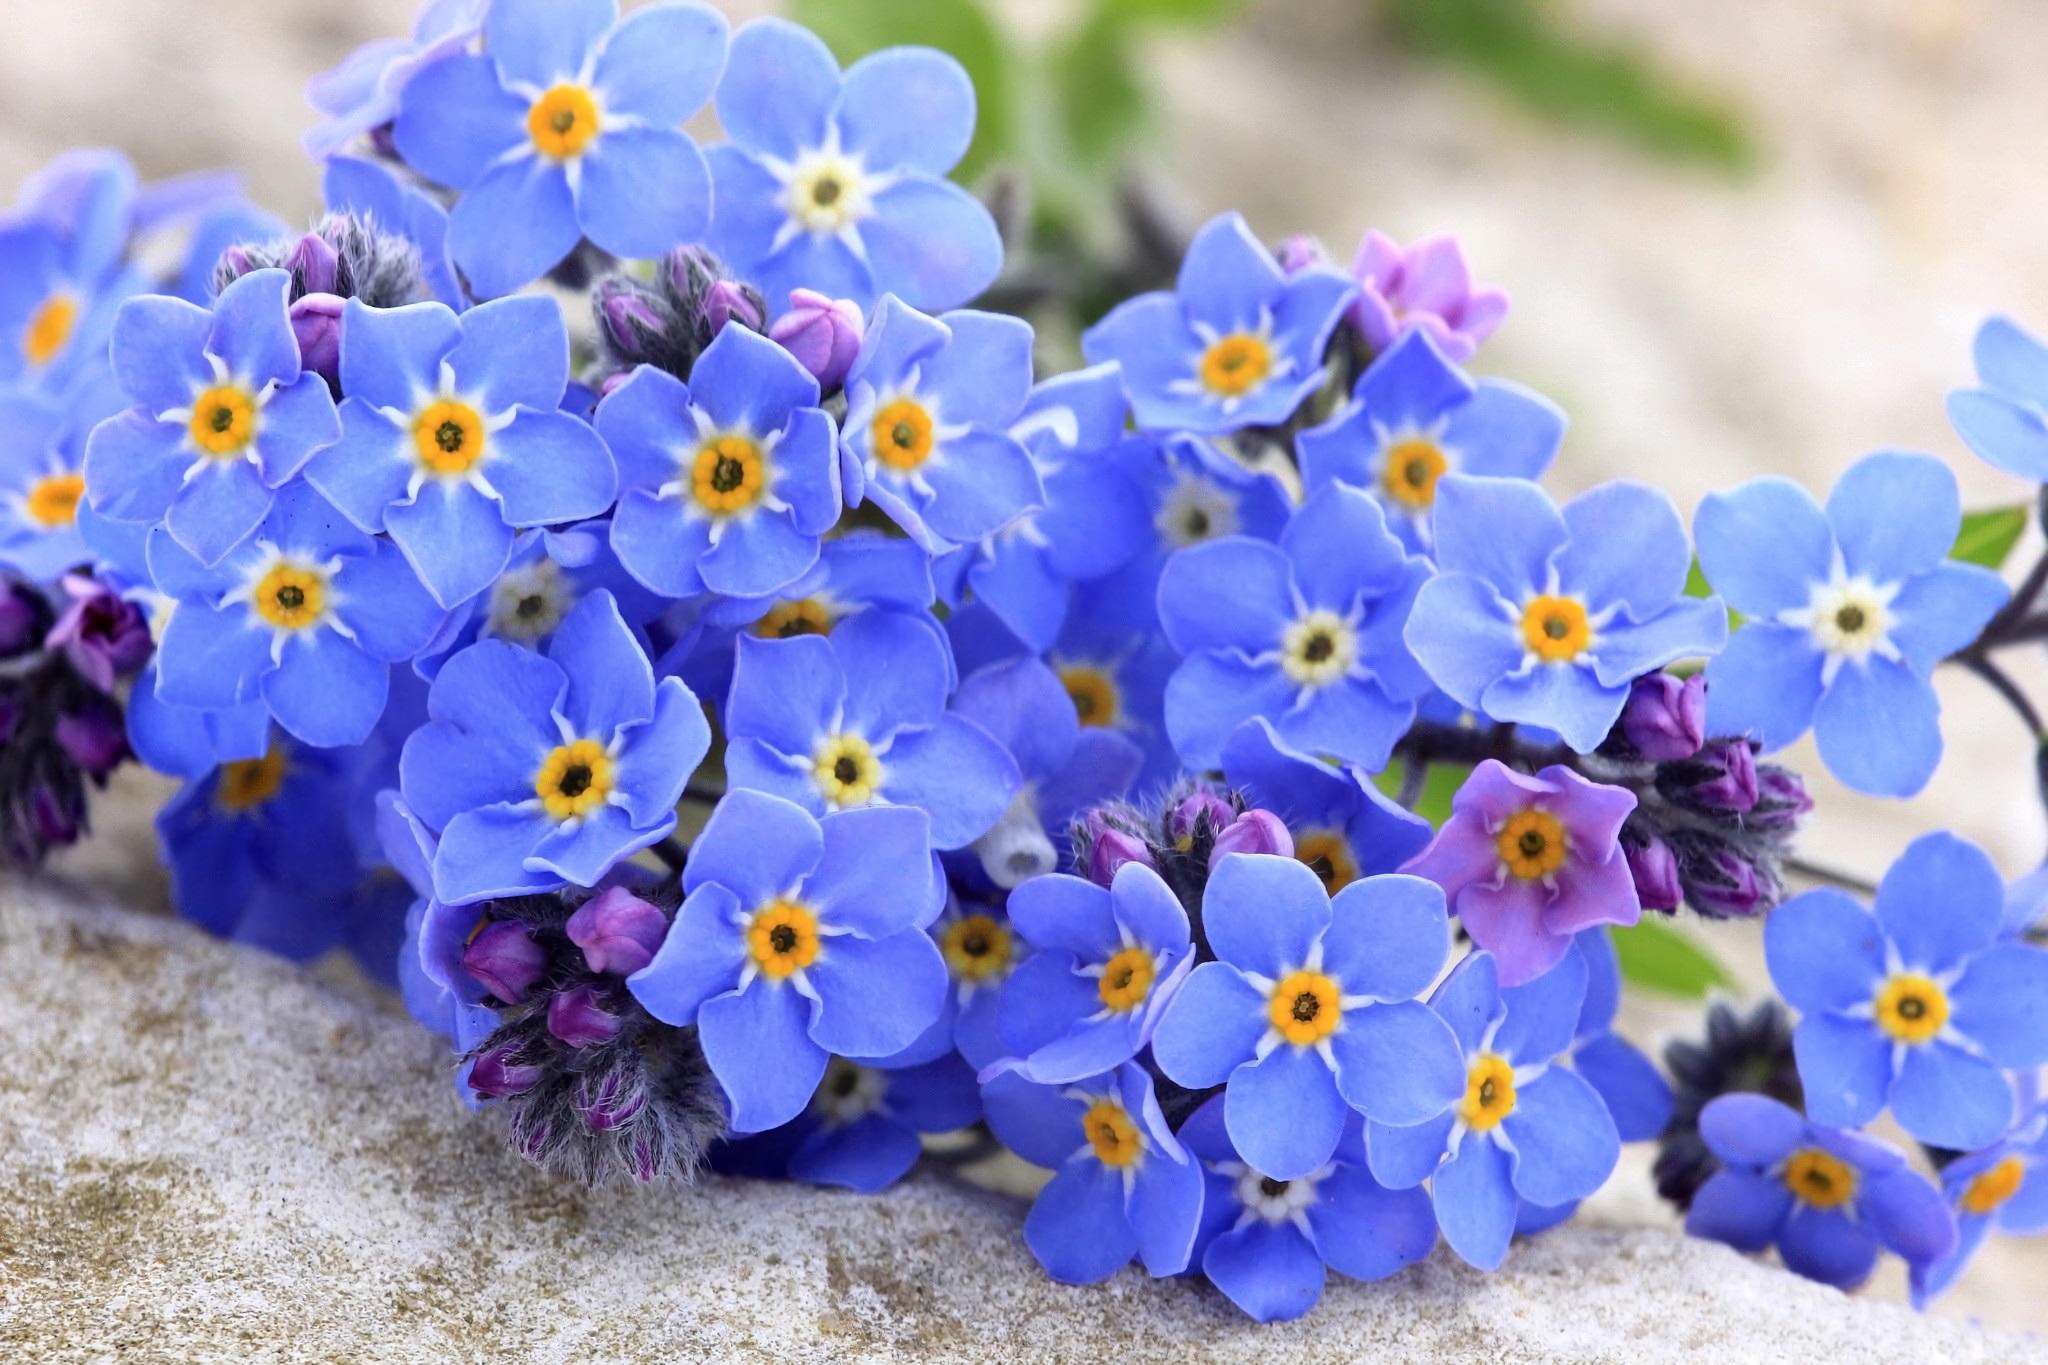 Earth Flower Forget Me Not Blue Flower 2048x1365